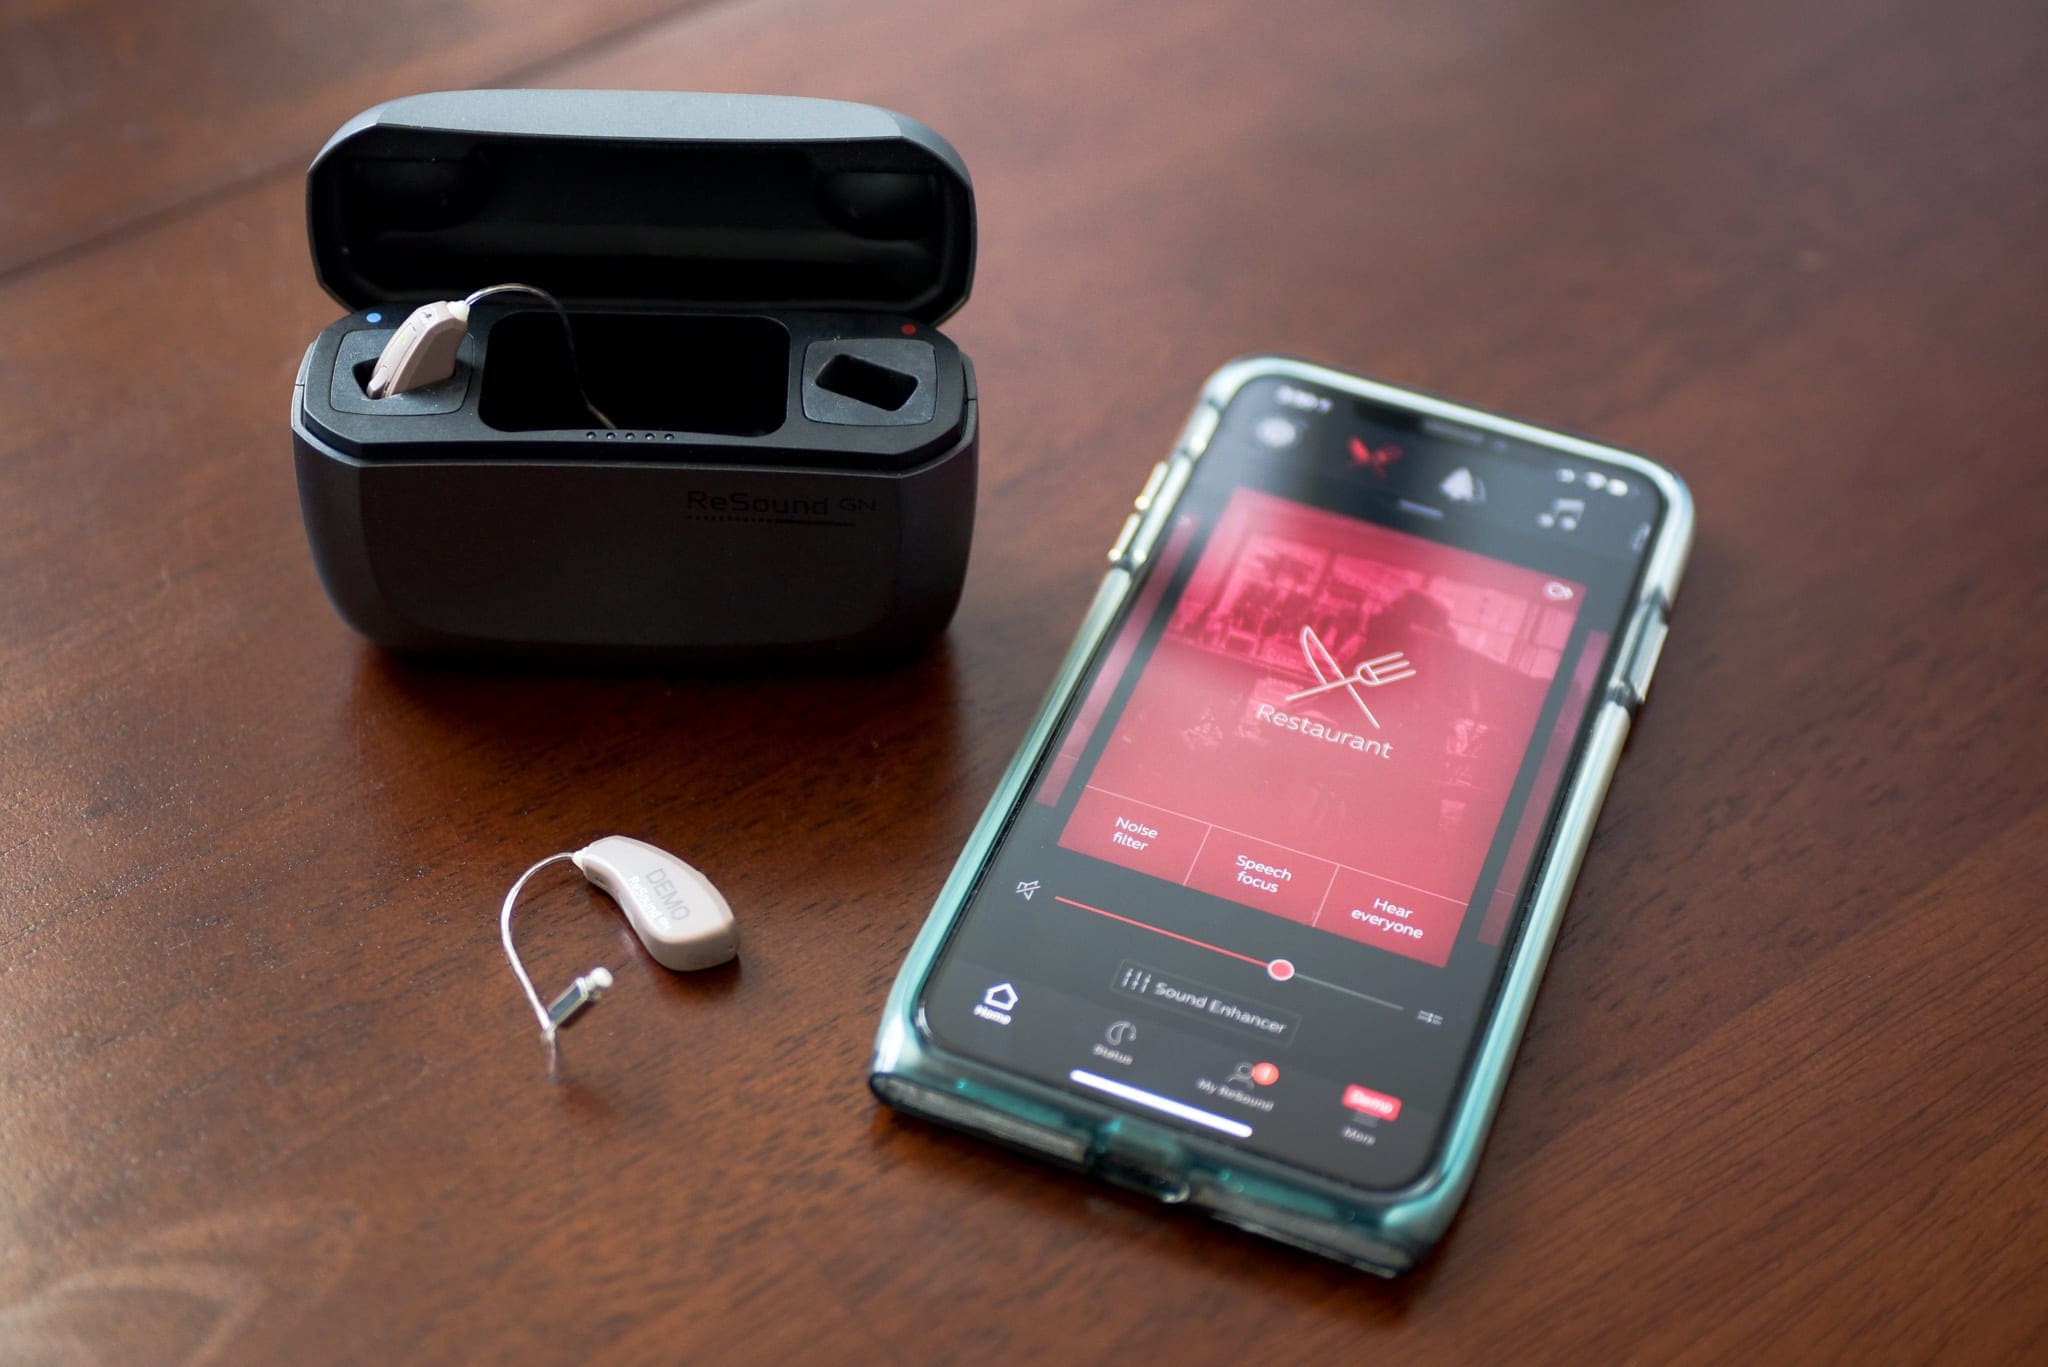 resound hearing aid and smartphone